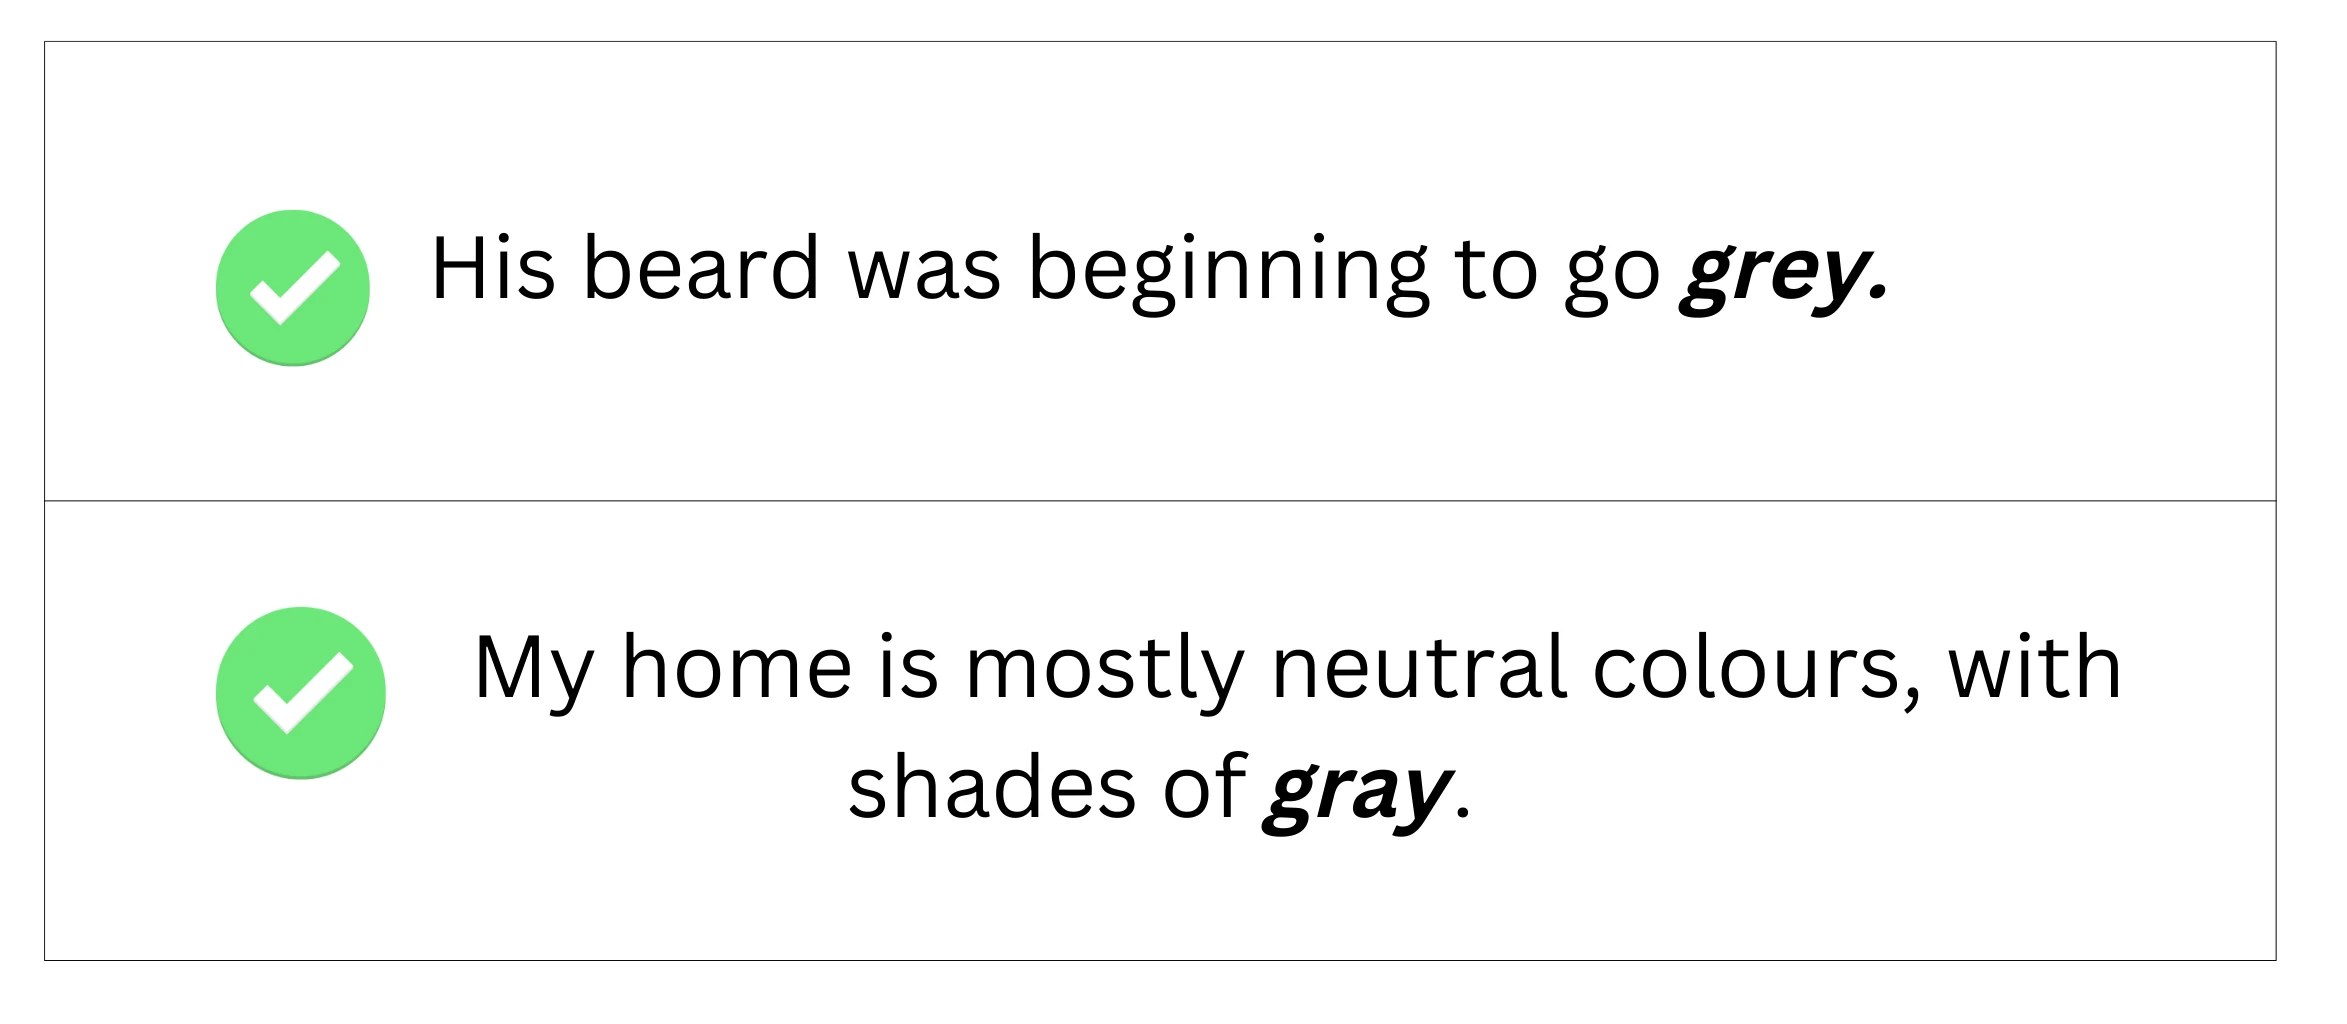 Gray vs. Grey: What is the Difference?